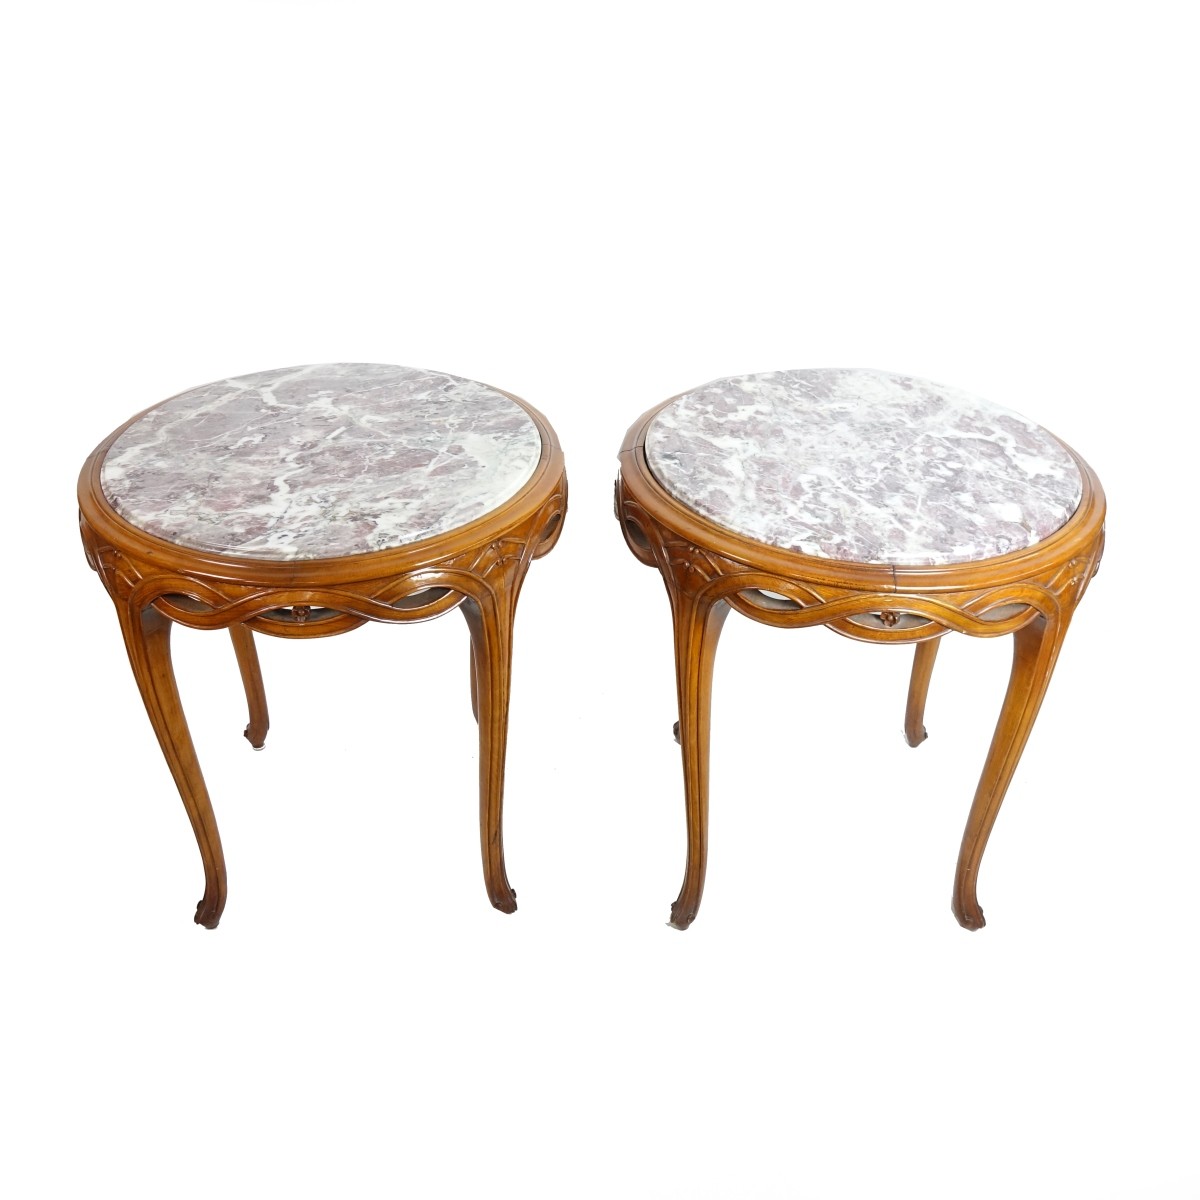 Pair of 20th C. Side Tables